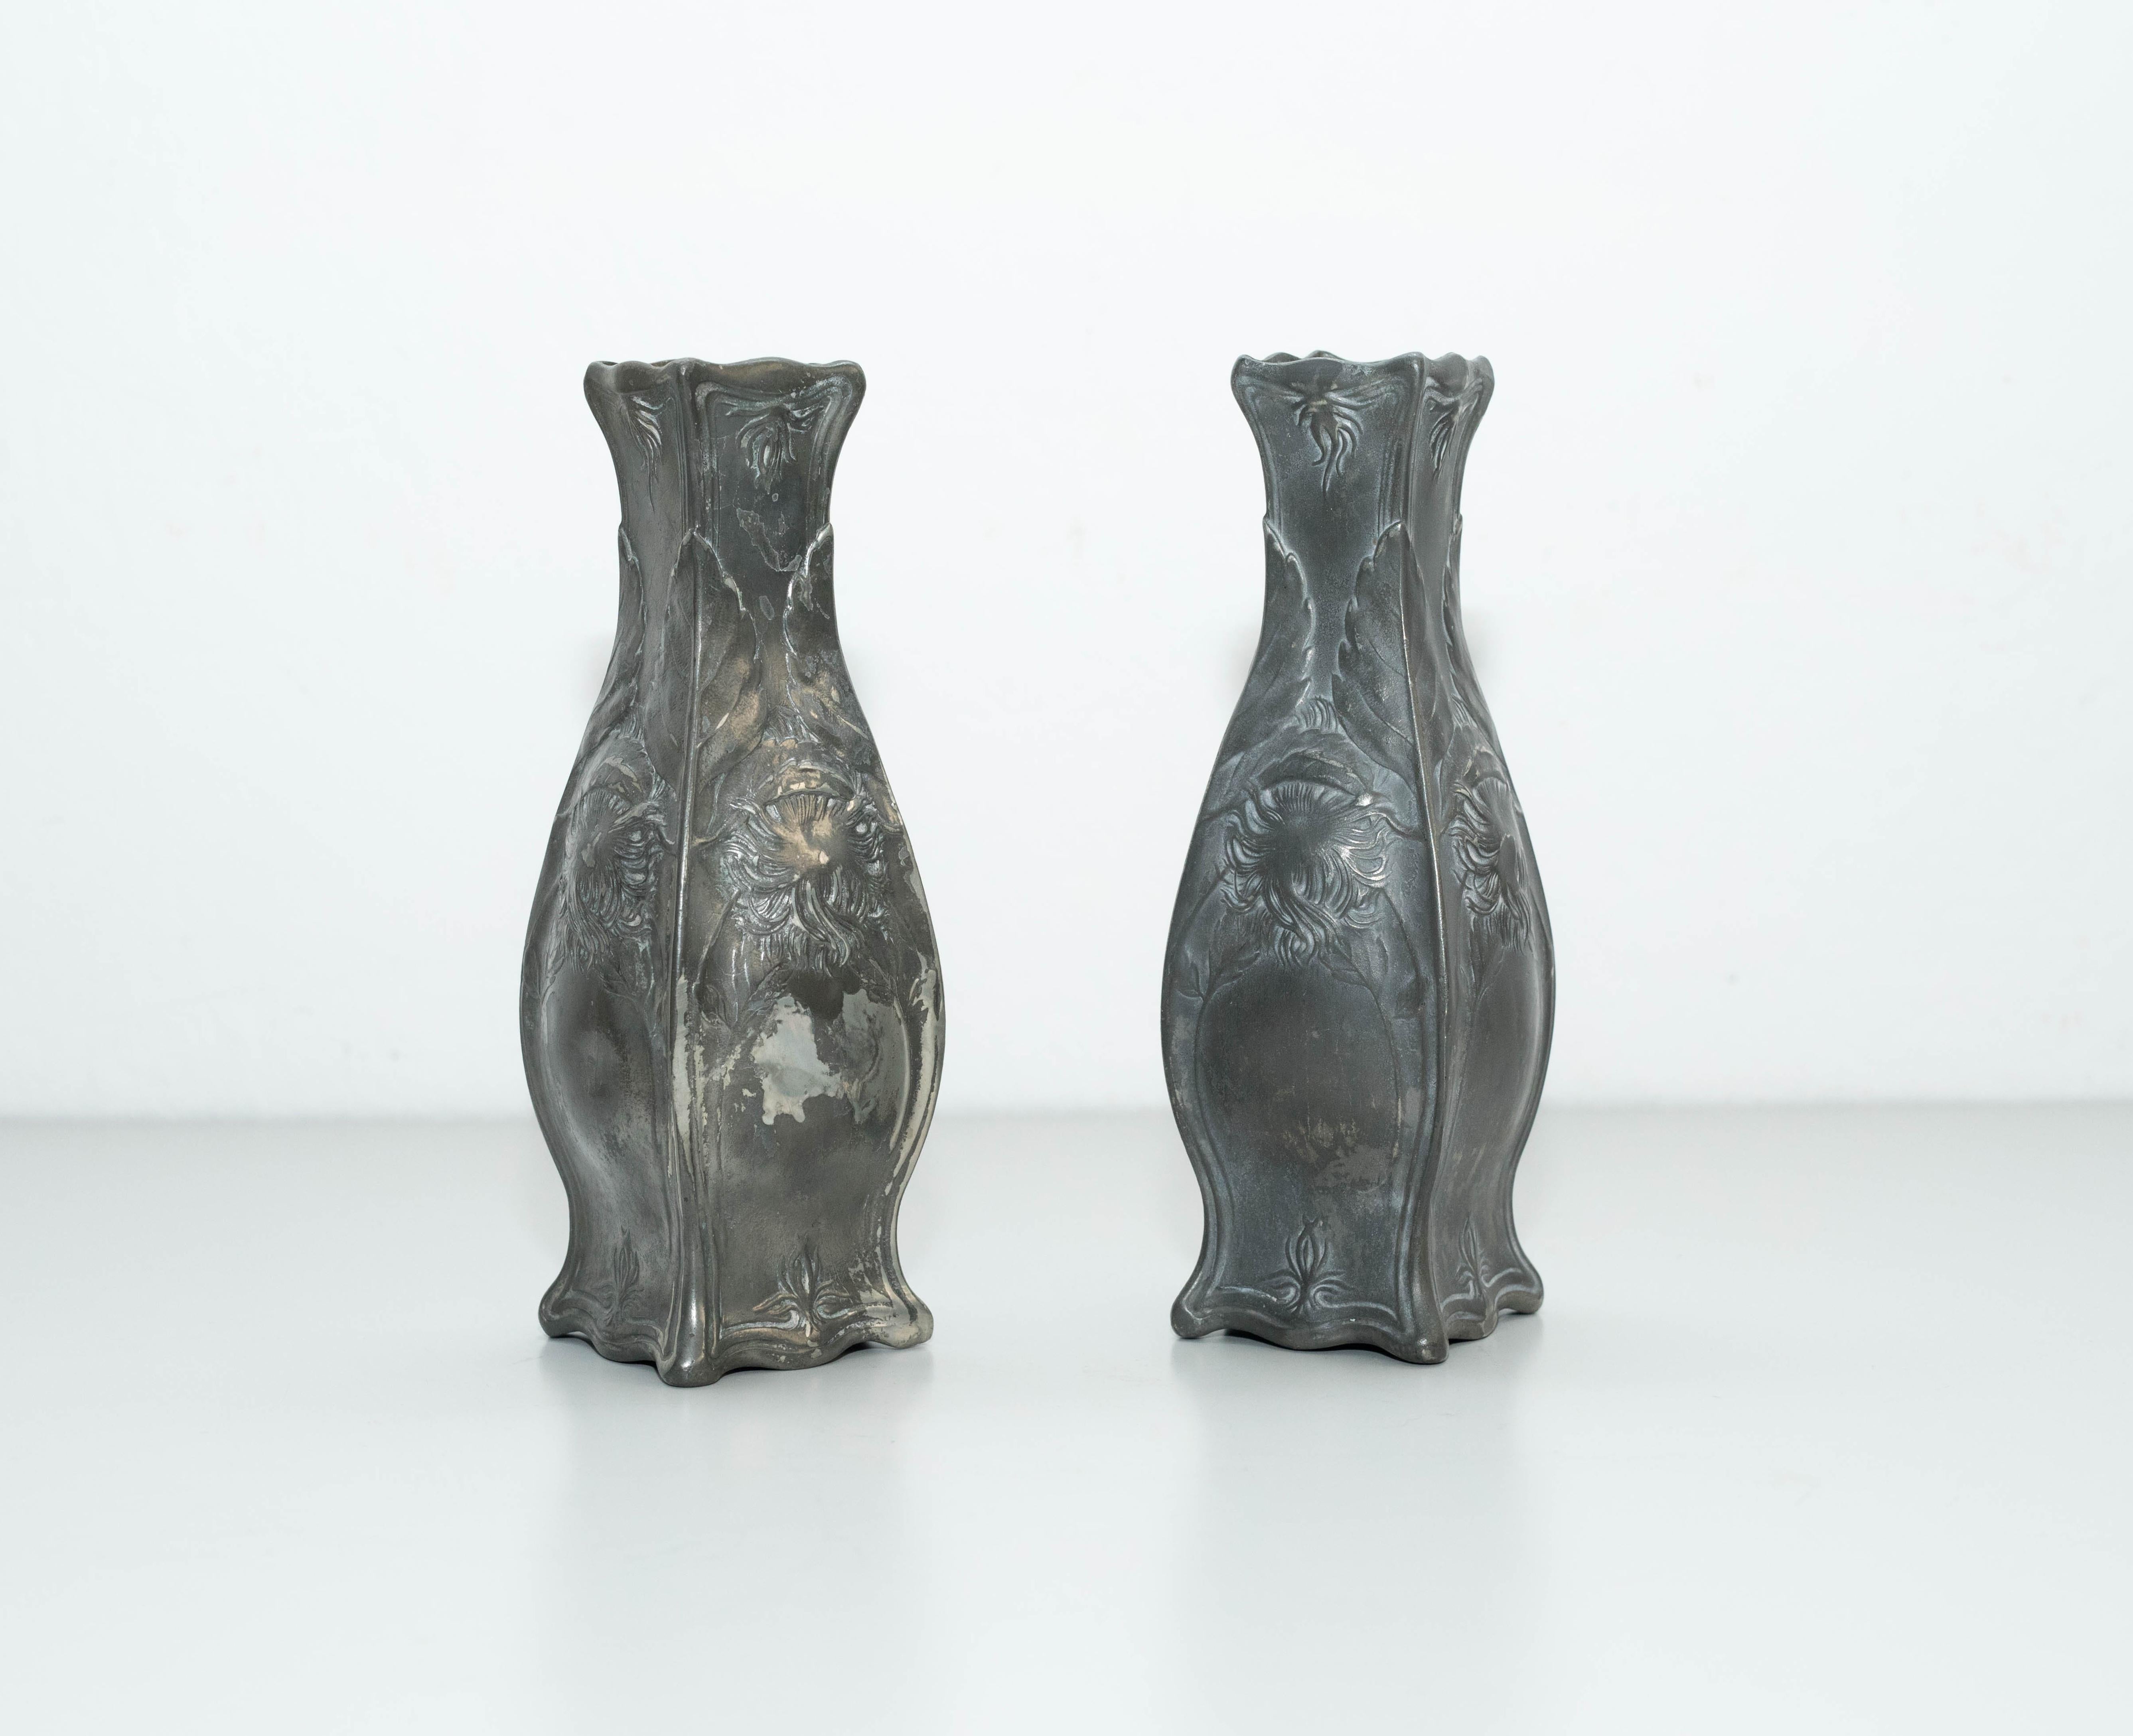 Set of two metal vases.
By unknown manufacturer from Spain, circa 1930.
Previous use was bullets.

In original condition, with minor wear consistent with age and use, preserving a beautiful patina.

Material:
Metal

Dimensions:
 6.3 D cm x